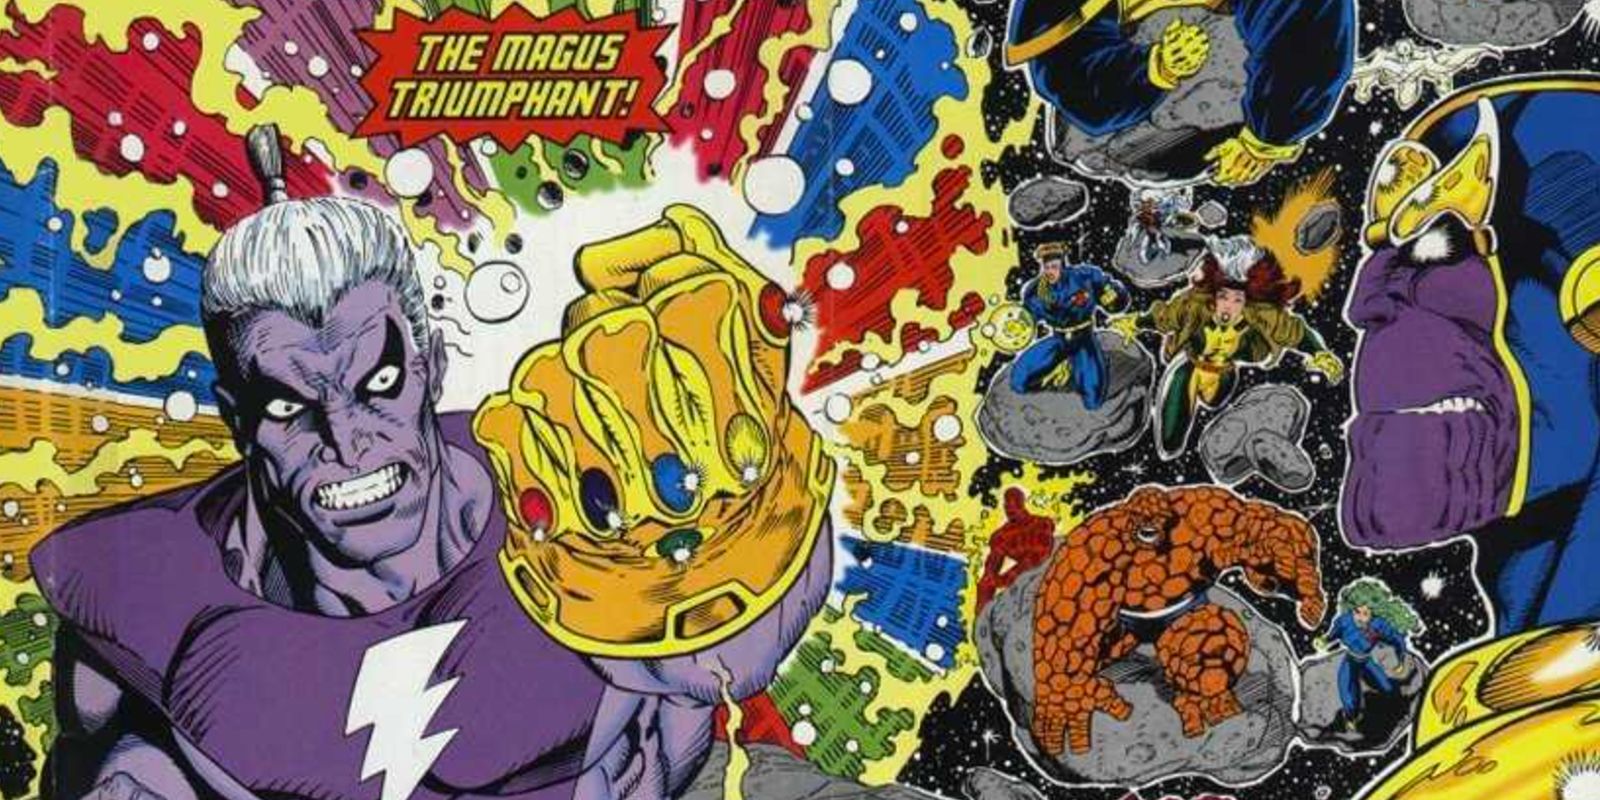 The Magus wields the Infinity Gauntlet in Marvel Comics.